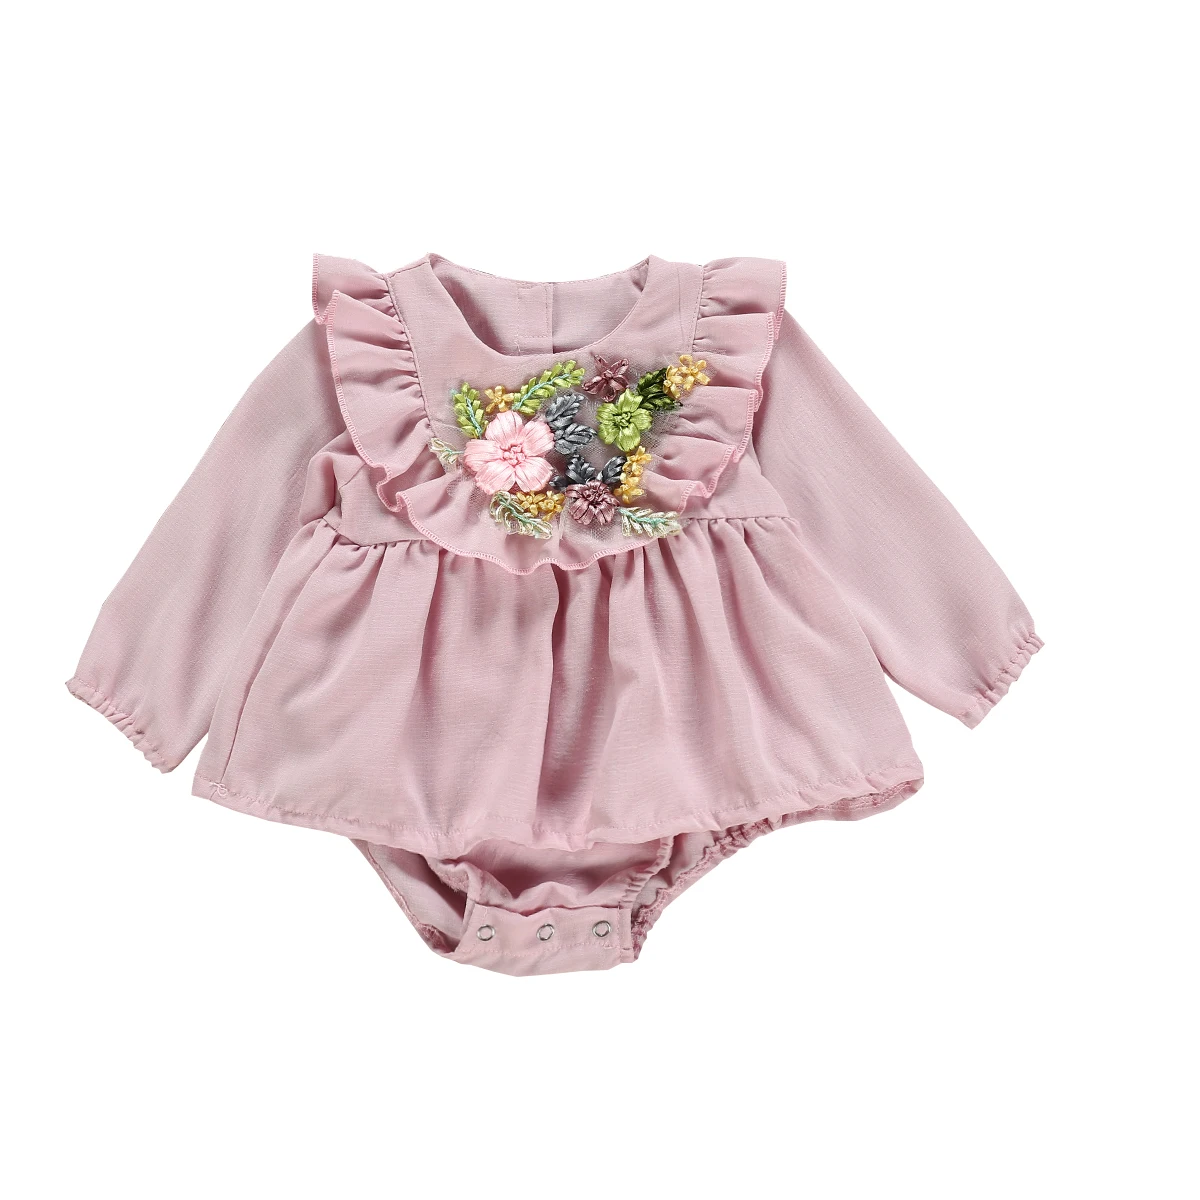 Cute Newborn Baby Girl Long Sleeve Floral Solid Color Dress Romper Jumpsuit Playsuit Outfits Baby Clothes - Цвет: Фиолетовый